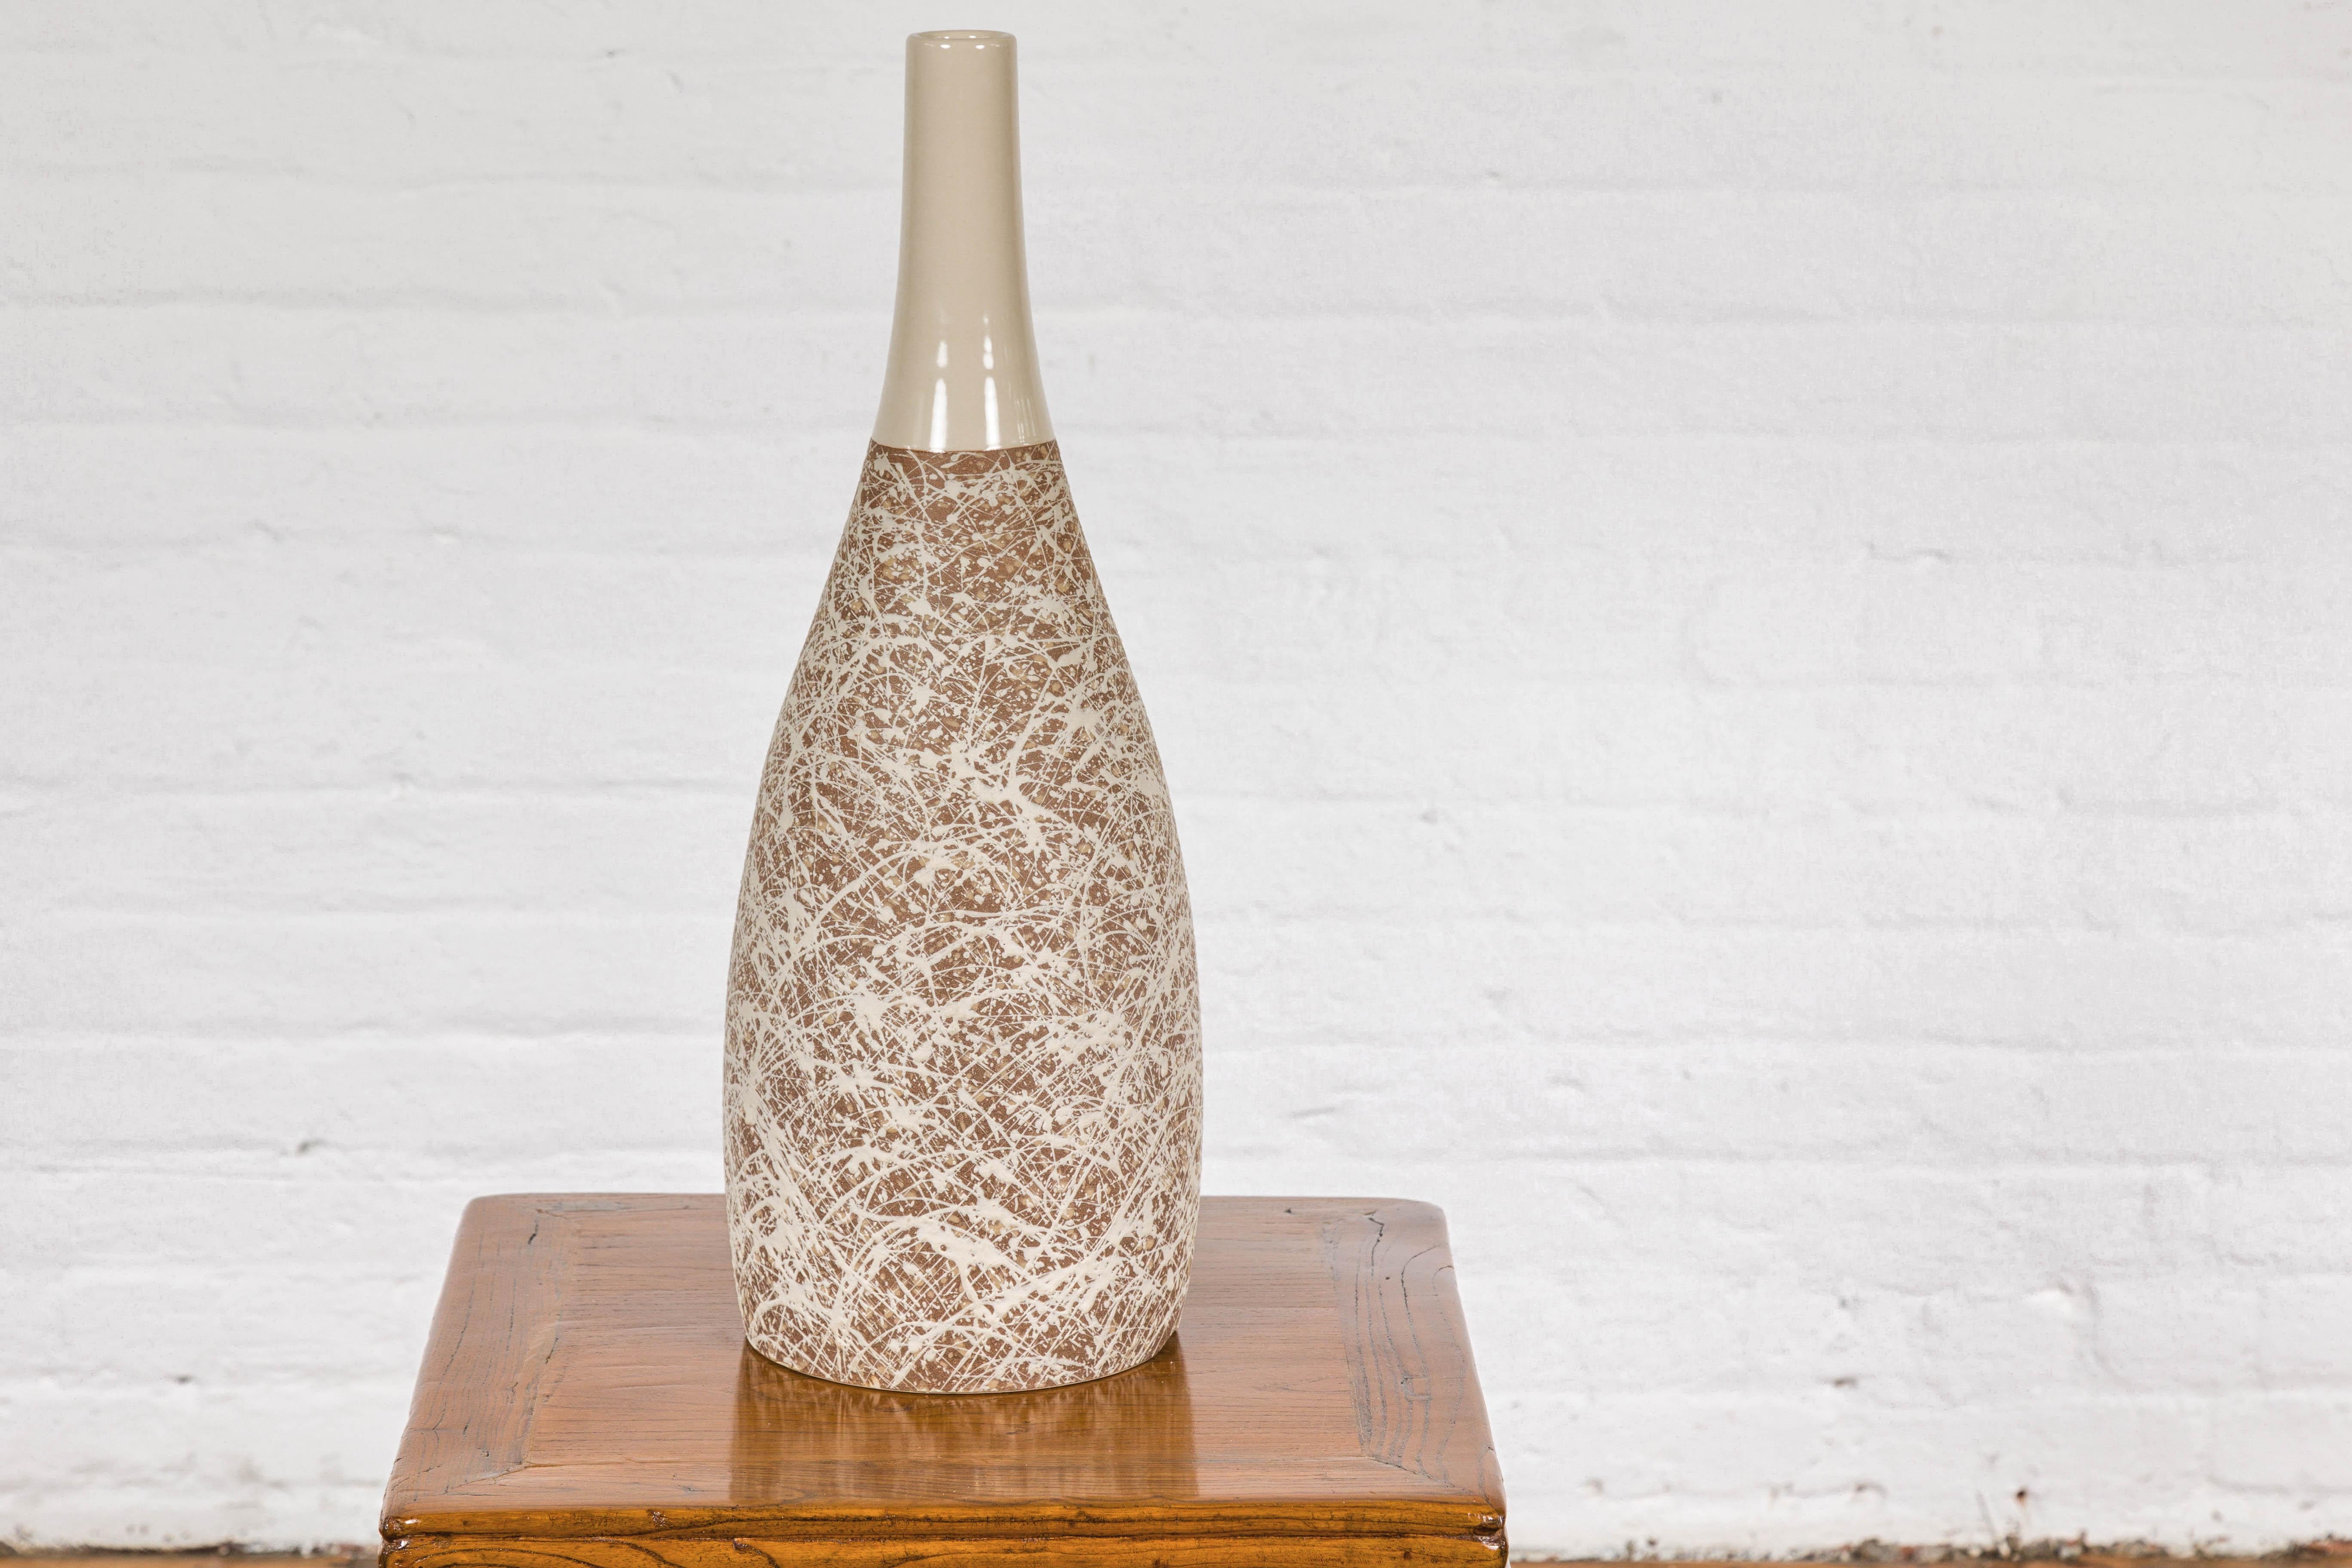 Hand-Crafted Artisan Bottle Shaped Brown and Cream Ceramic Vase with Dripping In Good Condition For Sale In Yonkers, NY